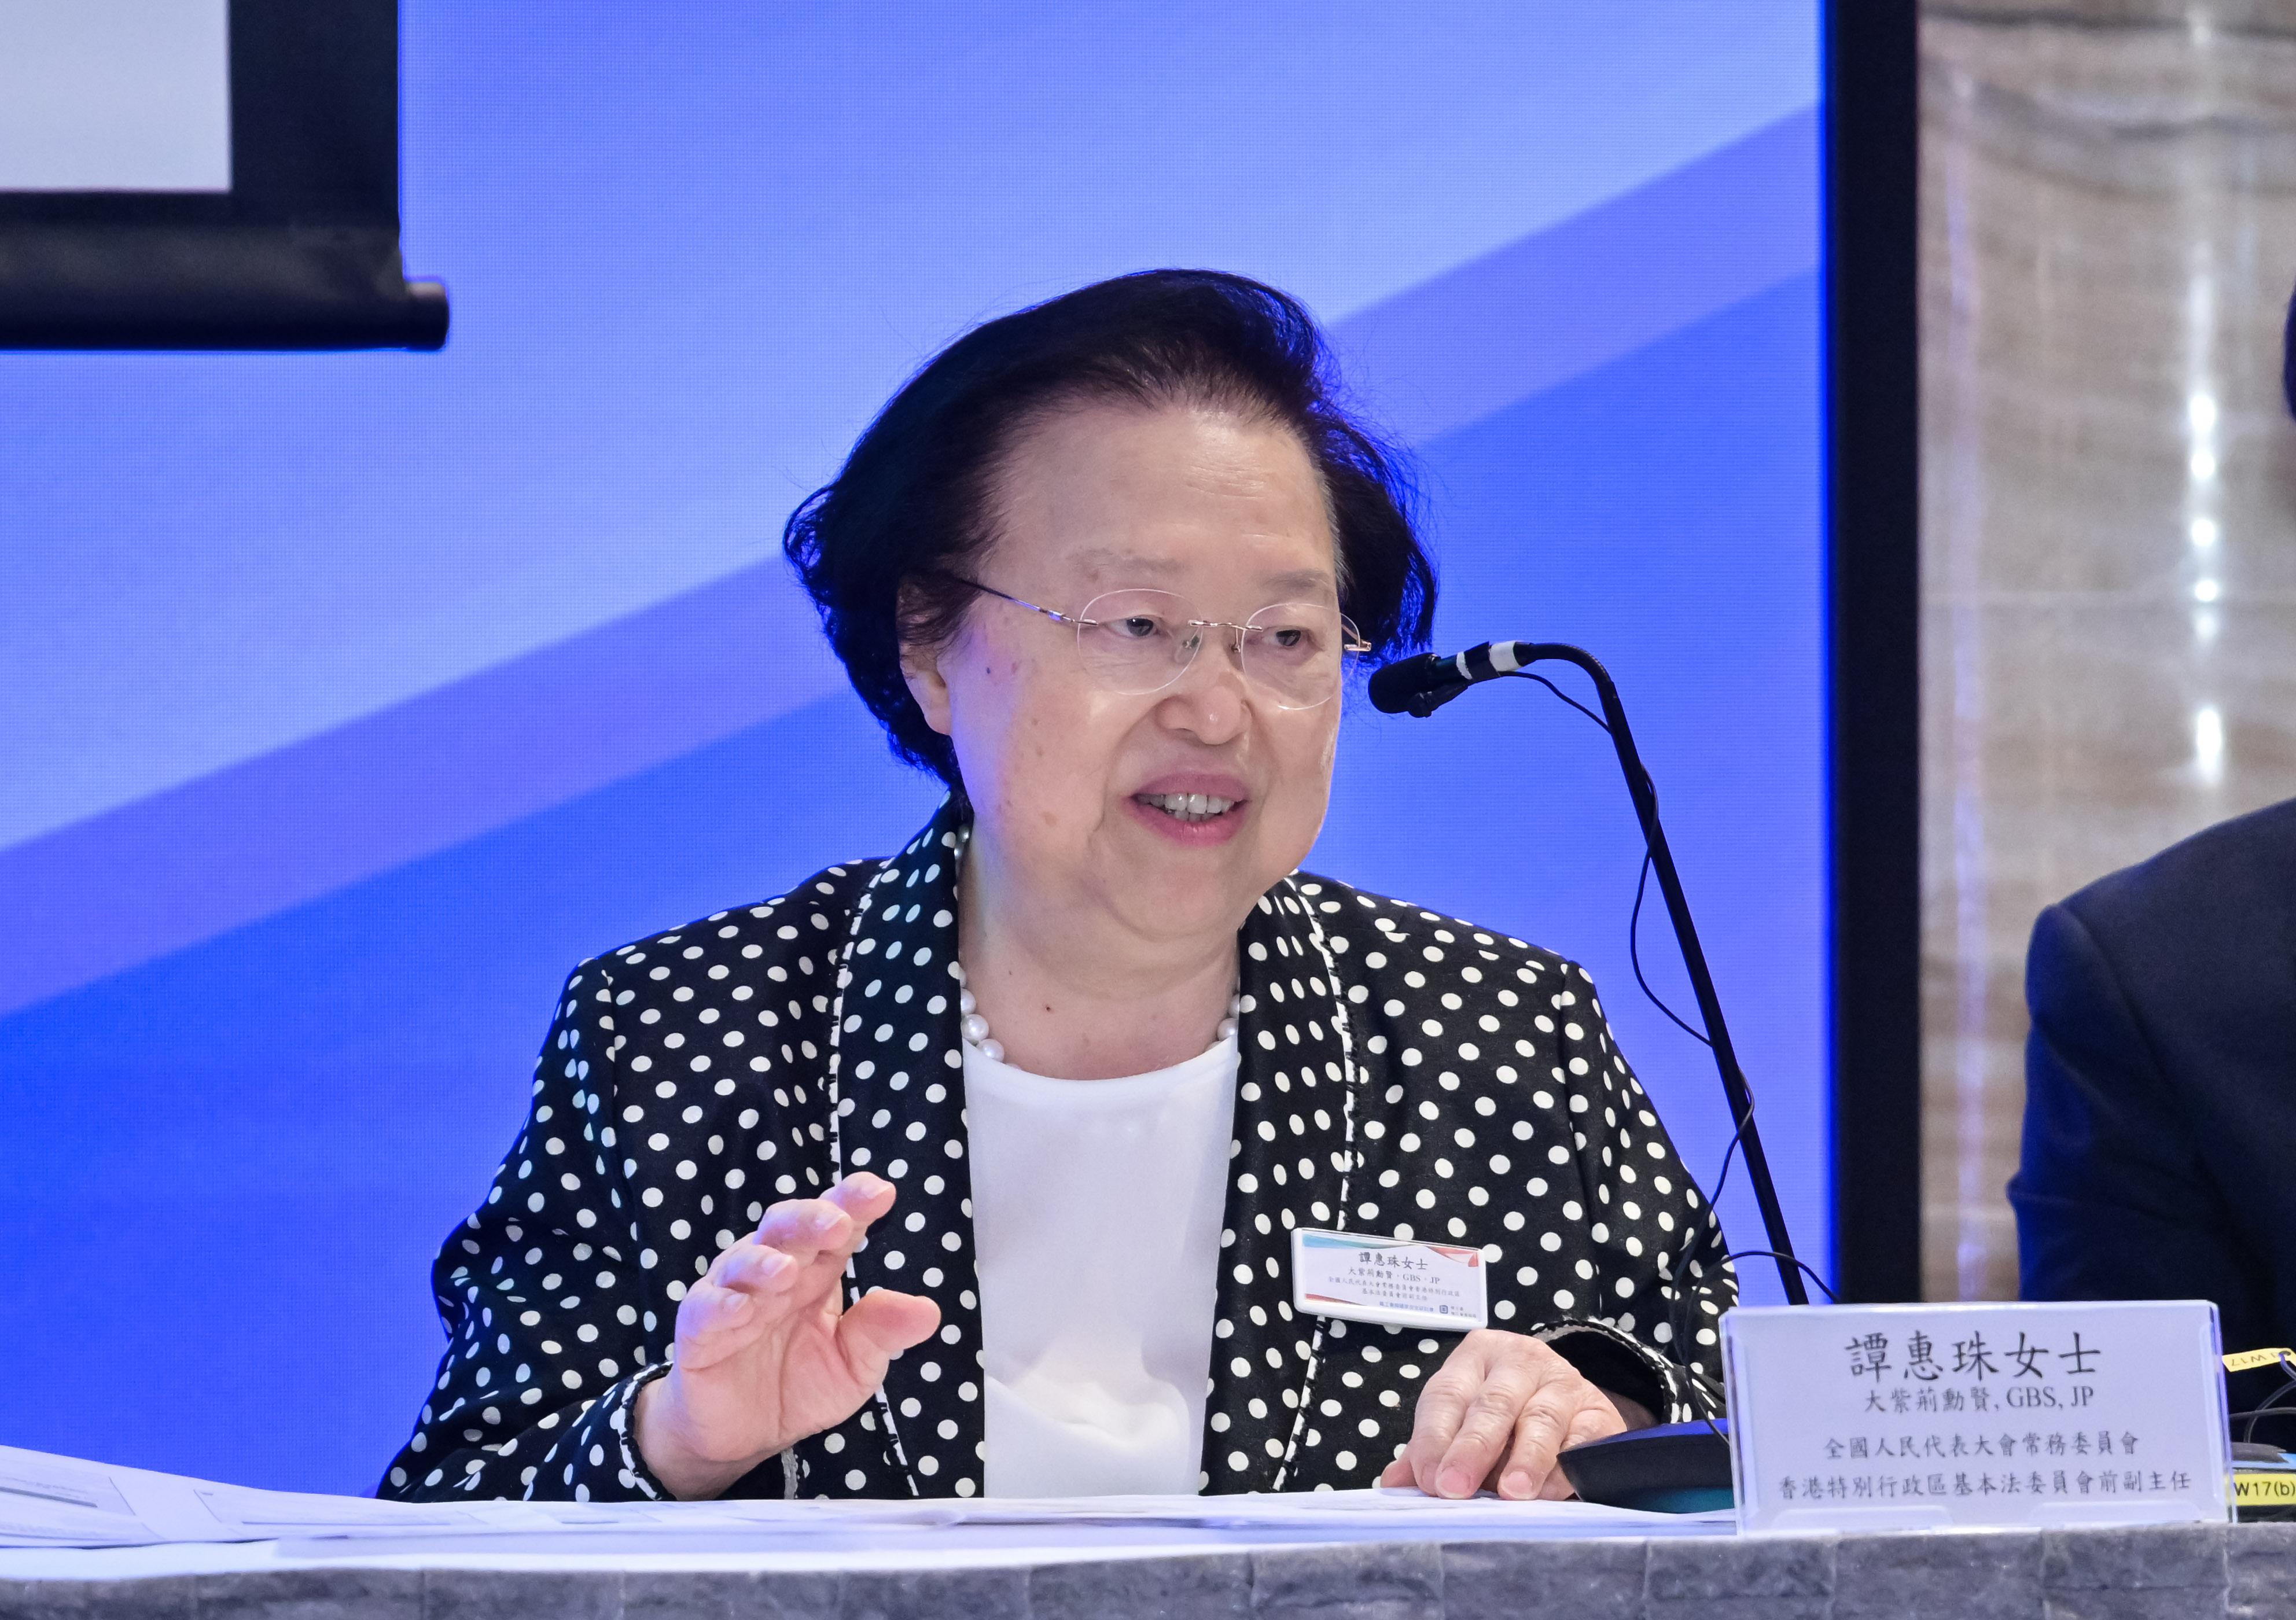 The Registry of Trade Unions of the Labour Department held today (April 13) the Seminar on National Security for Trade Unions. Photo shows the former Vice-chairperson of the Hong Kong Special Administrative Region Basic Law Committee of the Standing Committee of the National People’s Congress, Ms Maria Tam, delivering a talk.